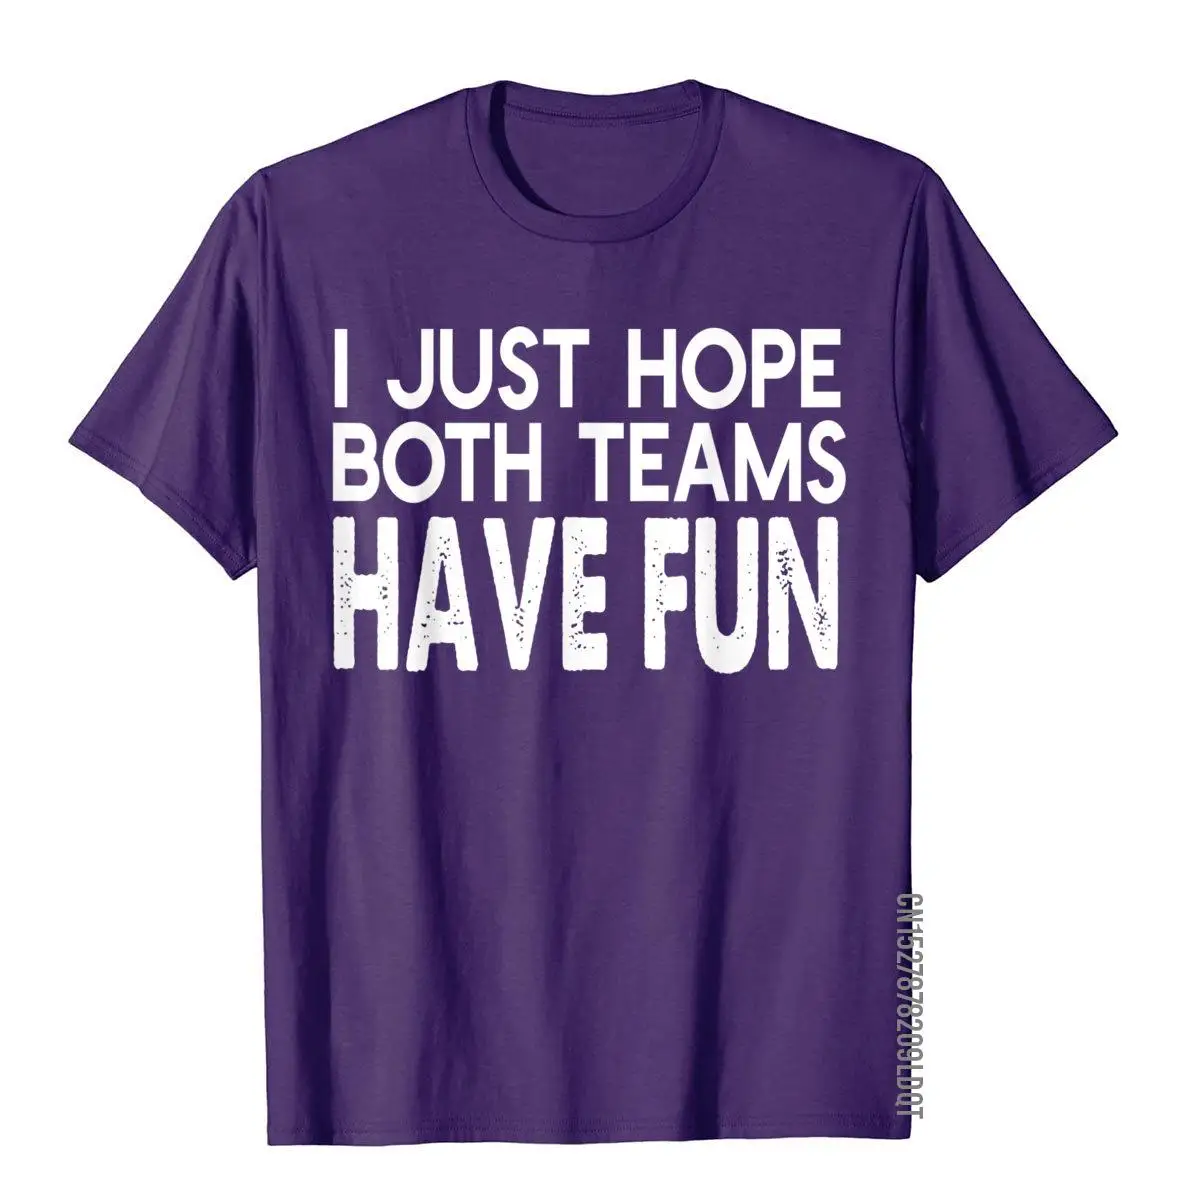 I Just Hope Both Teams Have Fun design Funny Sports Gift T-Shirt__B11181purple